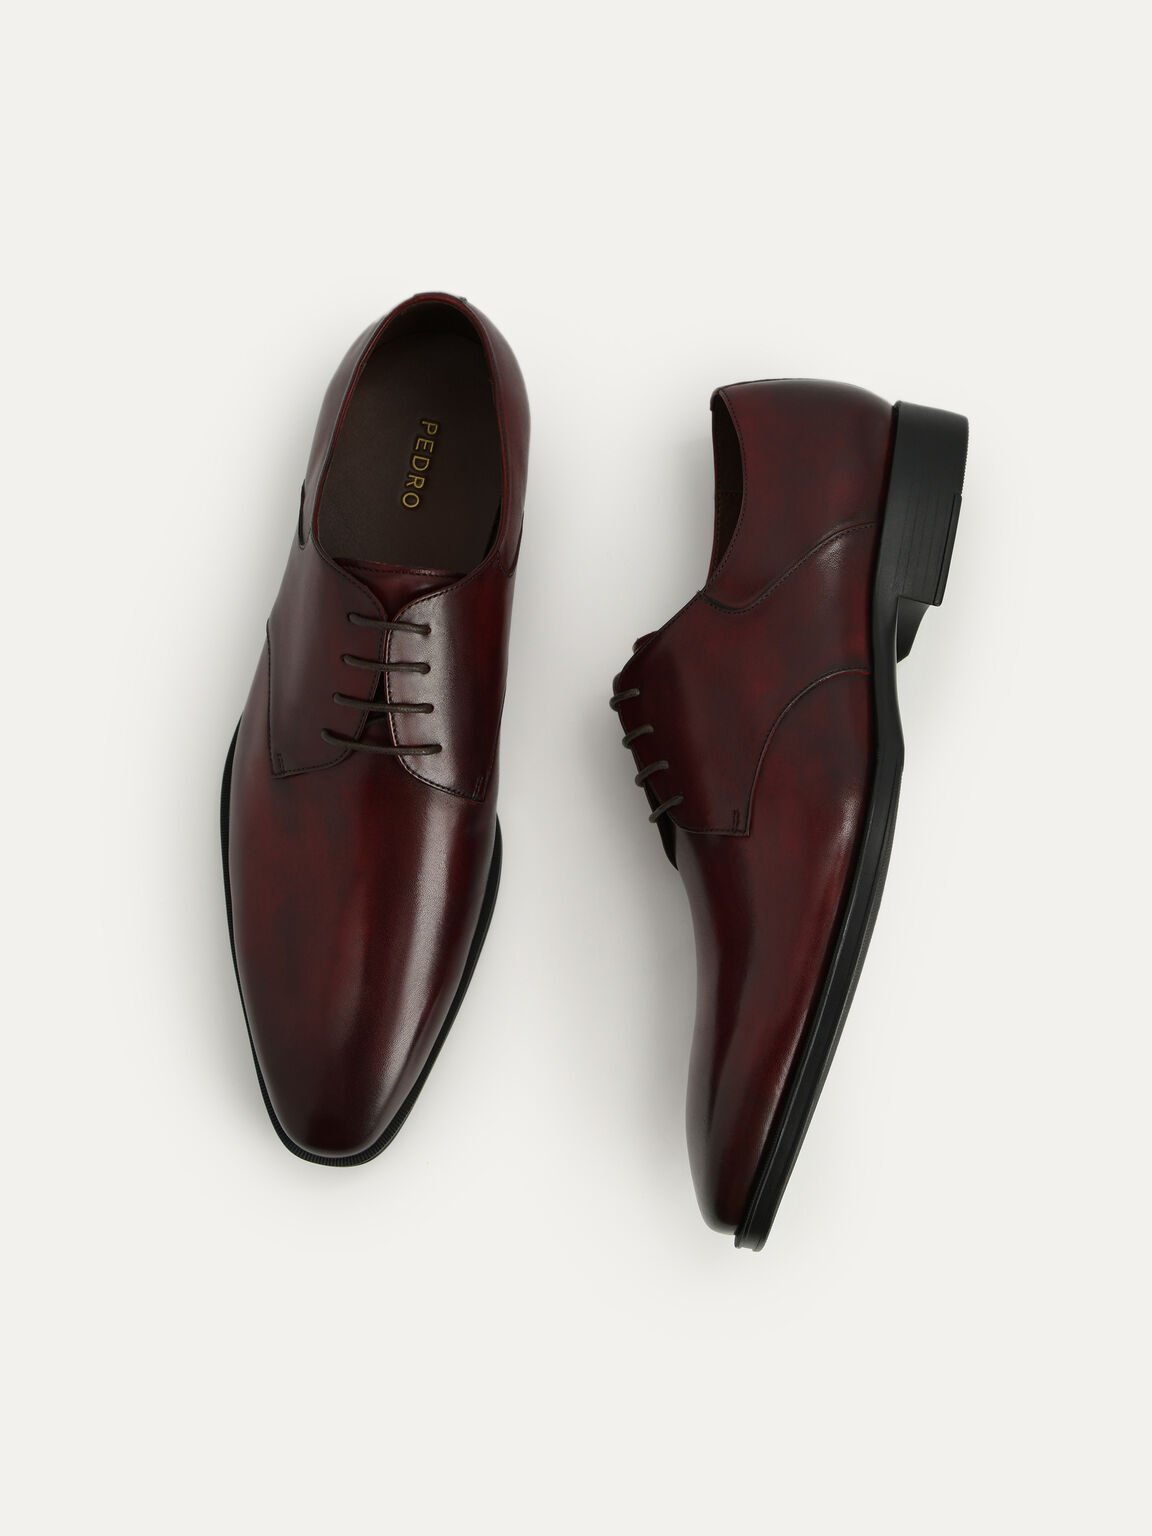 Leather Derby Shoes, Maroon